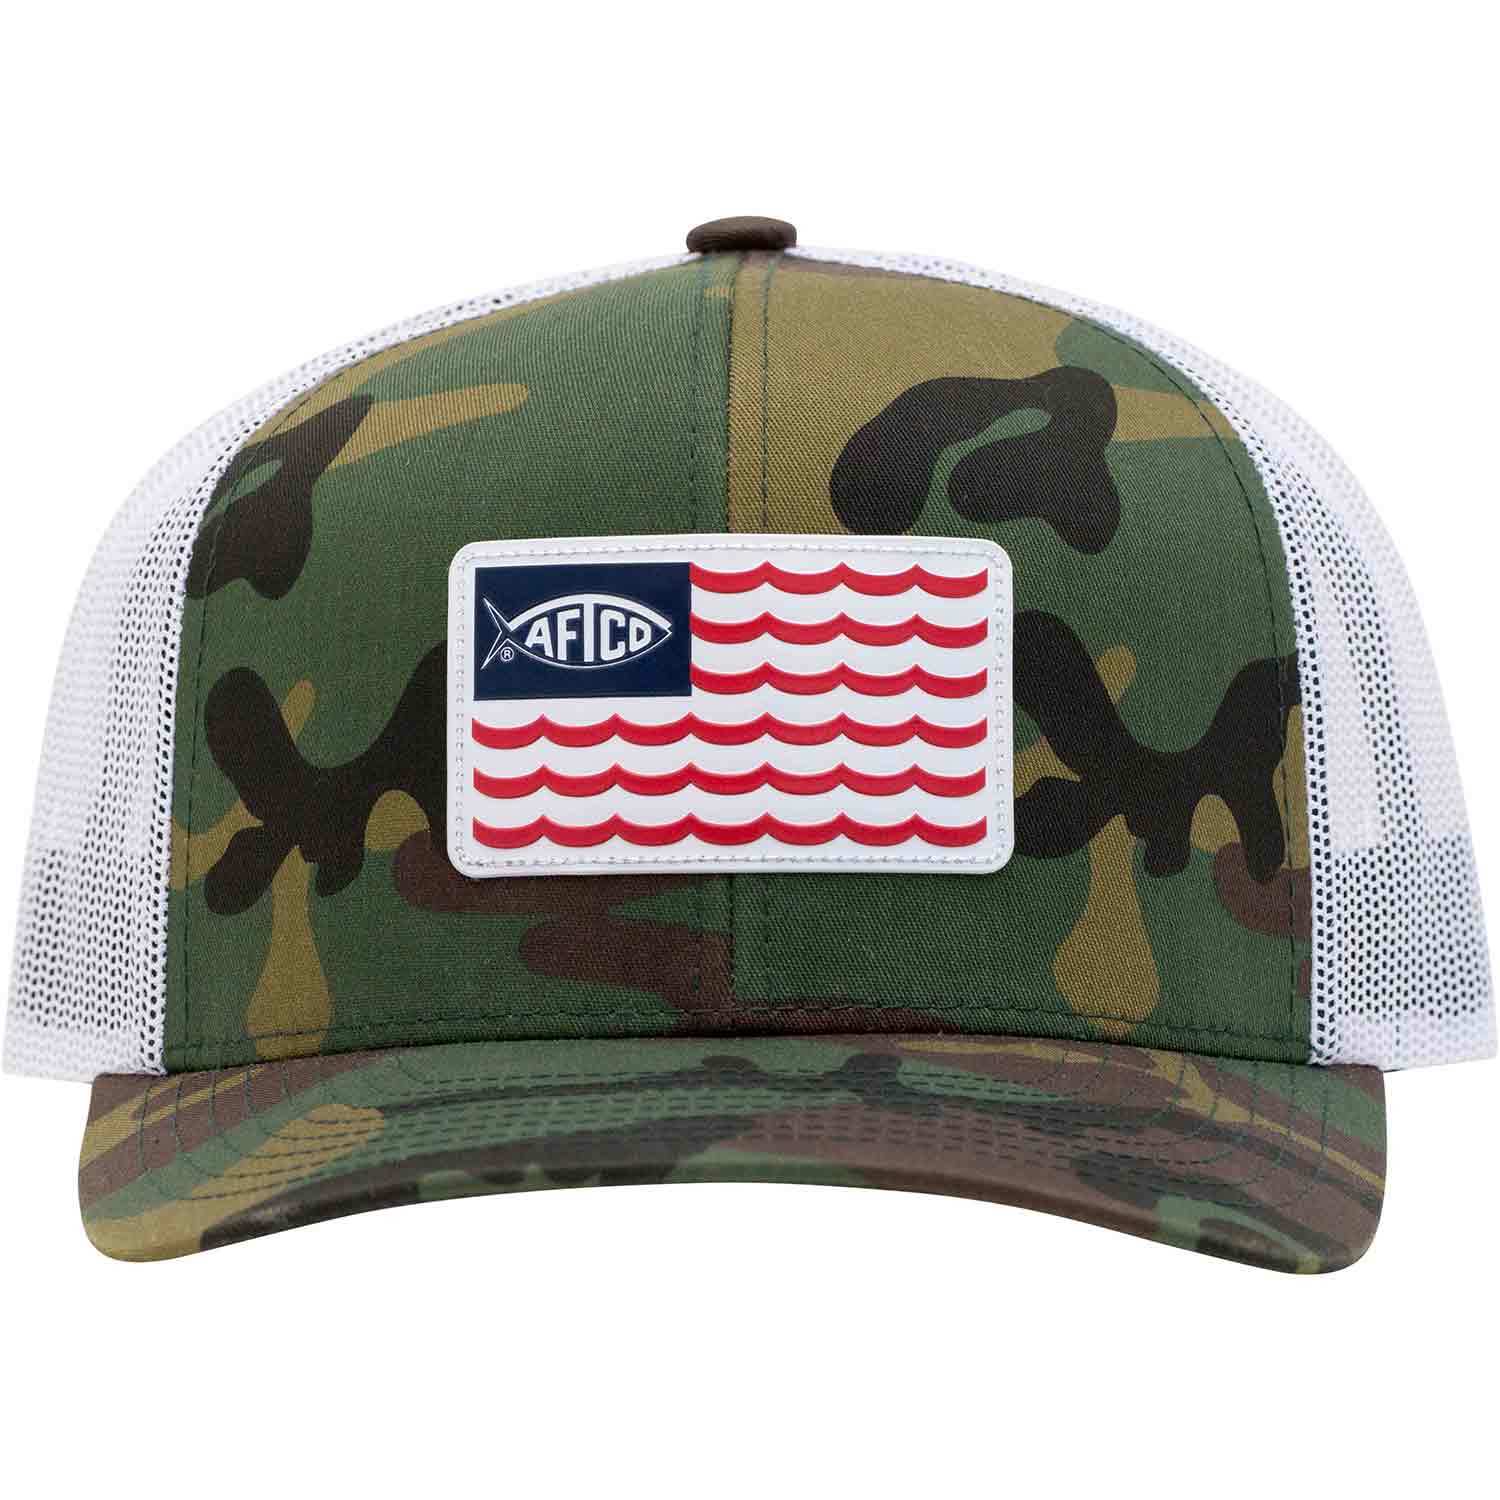 AFTCO Canton Trucker Hat - White - Os